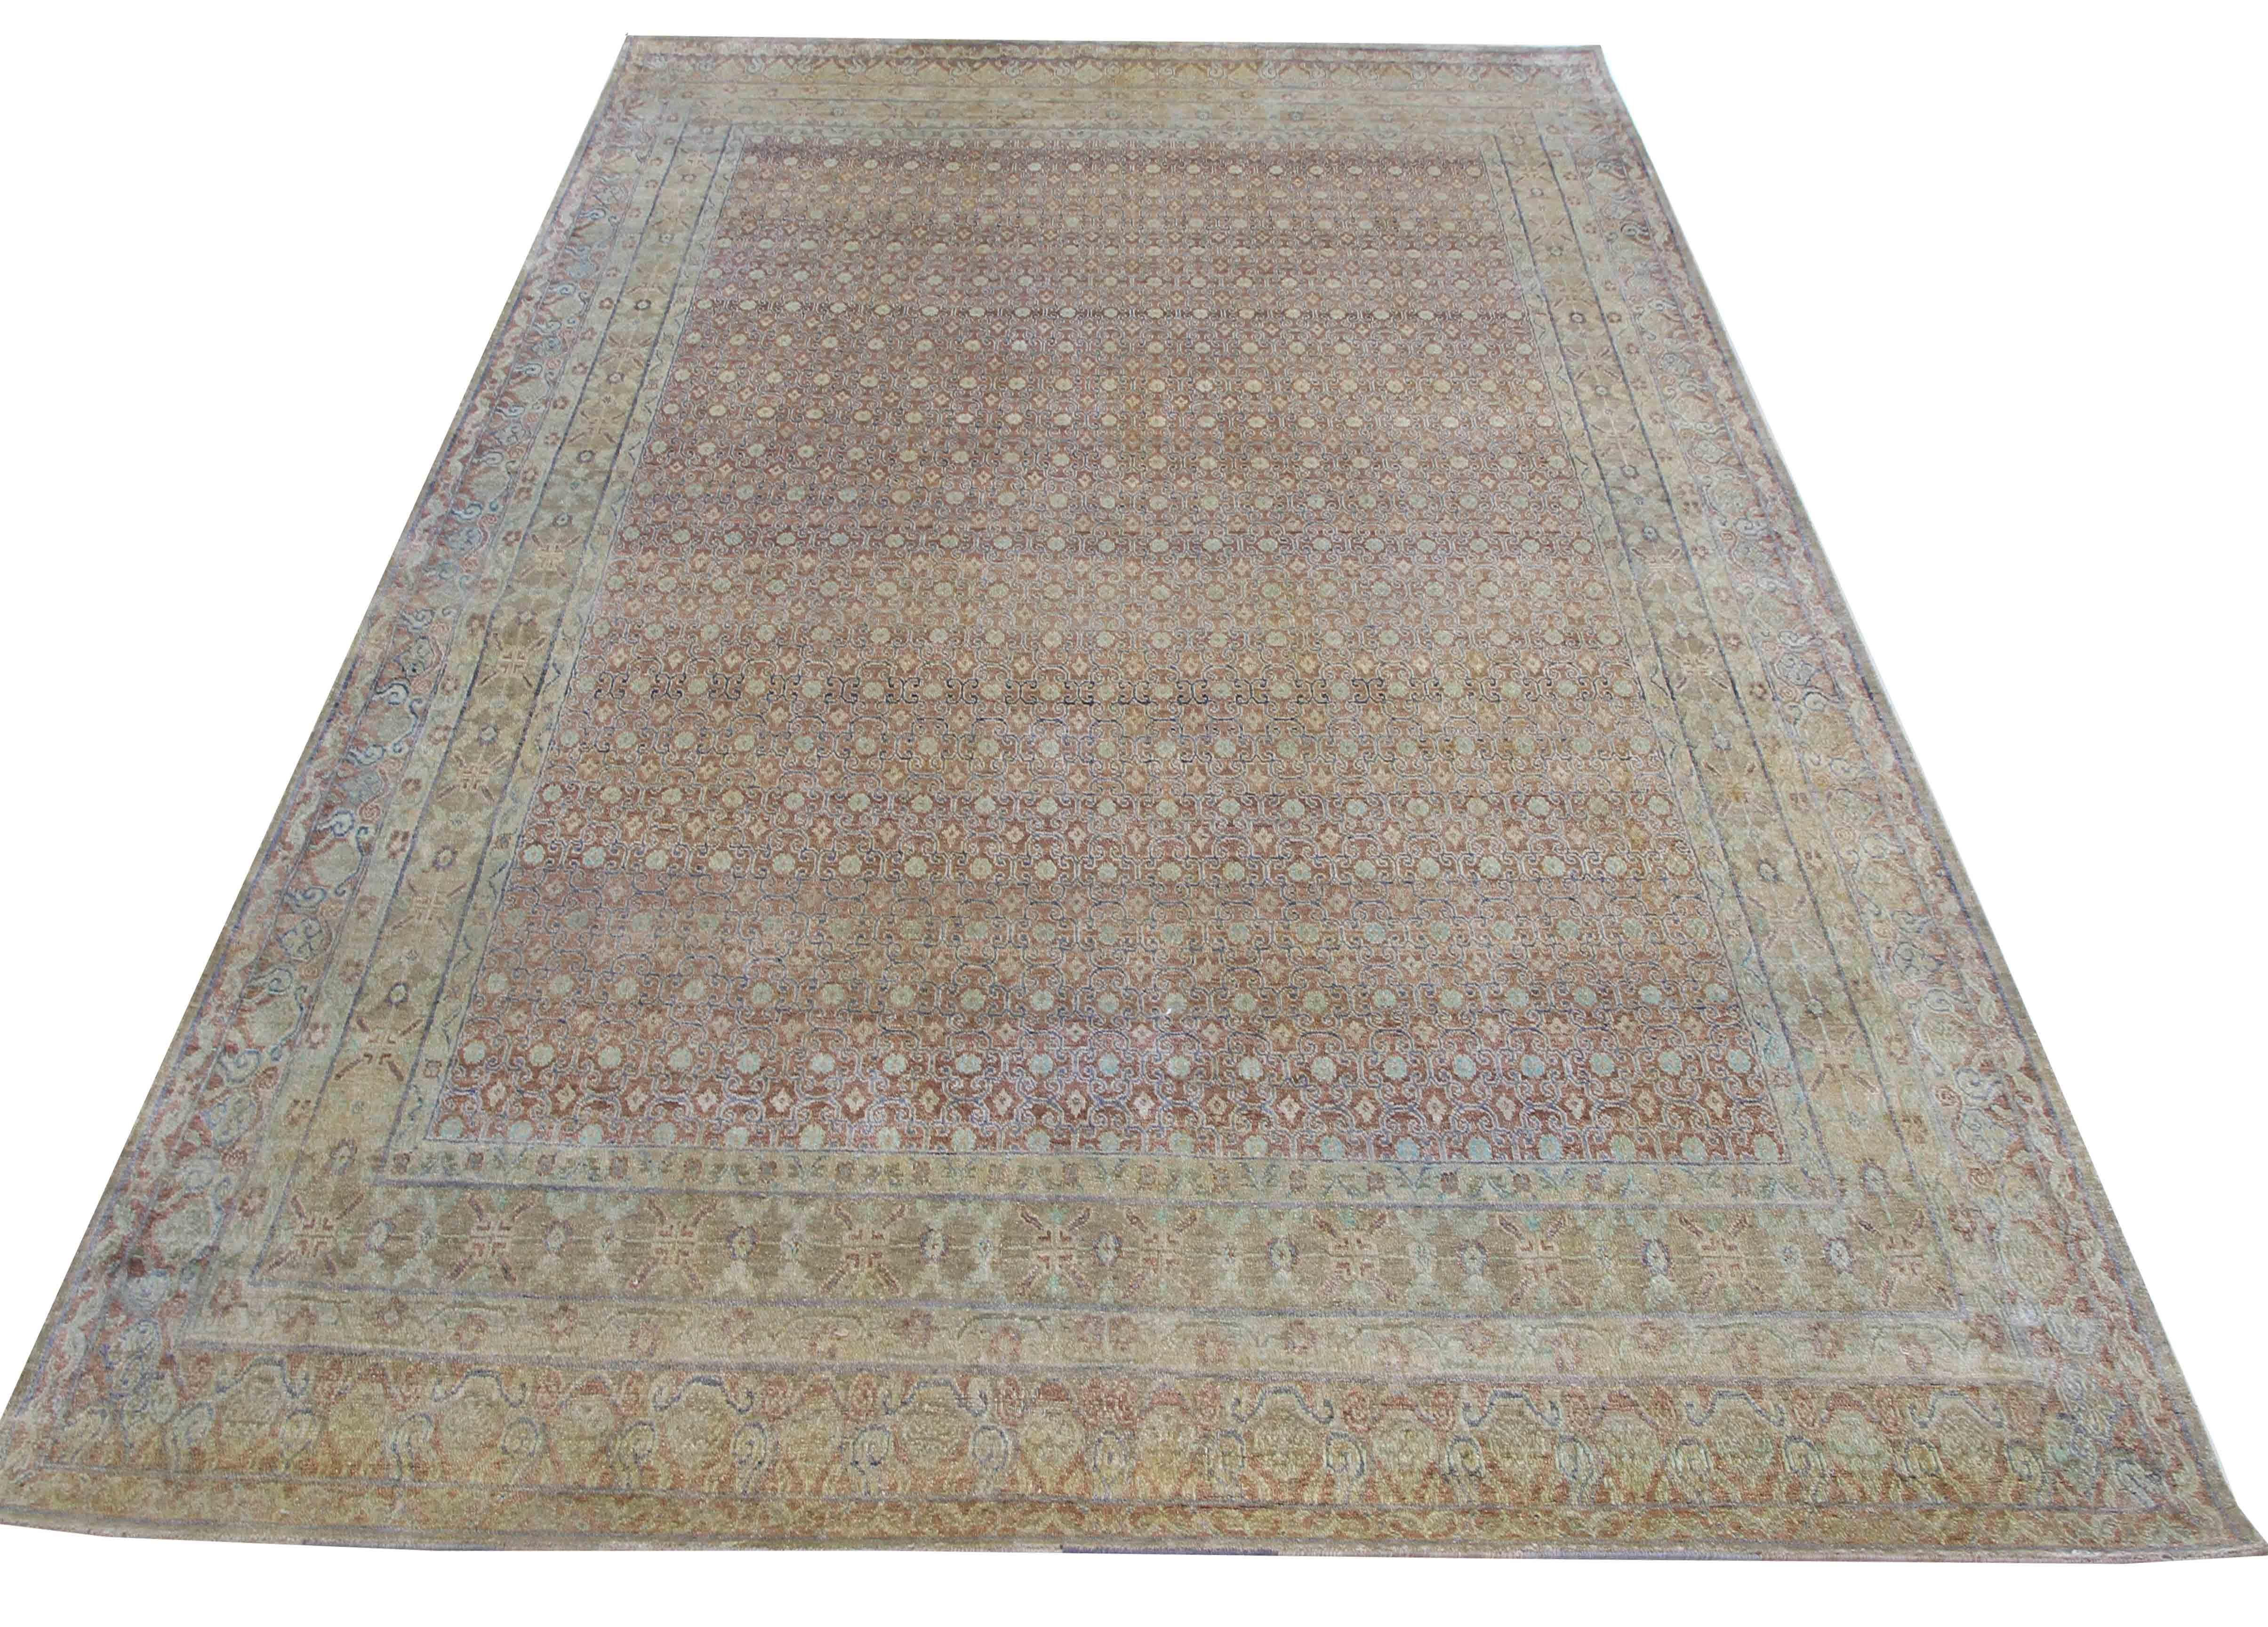 This hand-knotted silk rug is truly one of a kind, crafted from raw organic silk in a beautiful range of striated berries and creams. The rug is handmade in Jaipur, India, using traditional techniques that have been passed down through generations